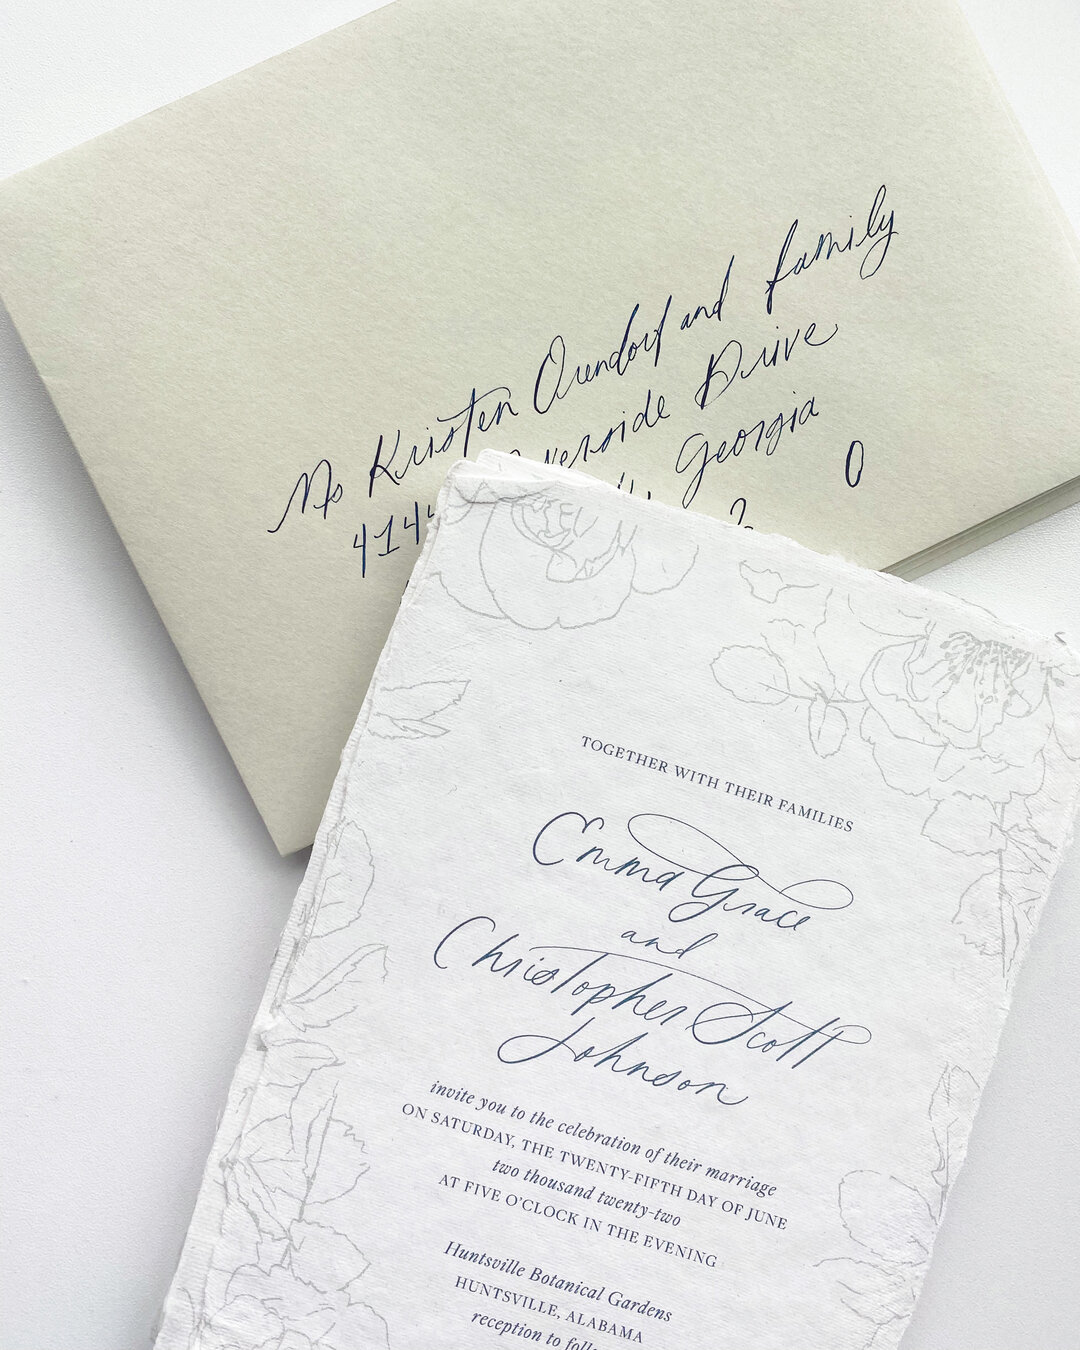 Congrats to Emma &amp; Chris getting married this weekend! They&rsquo;re getting married at a botanical garden so this cute little floral detail was perfect for their invitations 😌💐